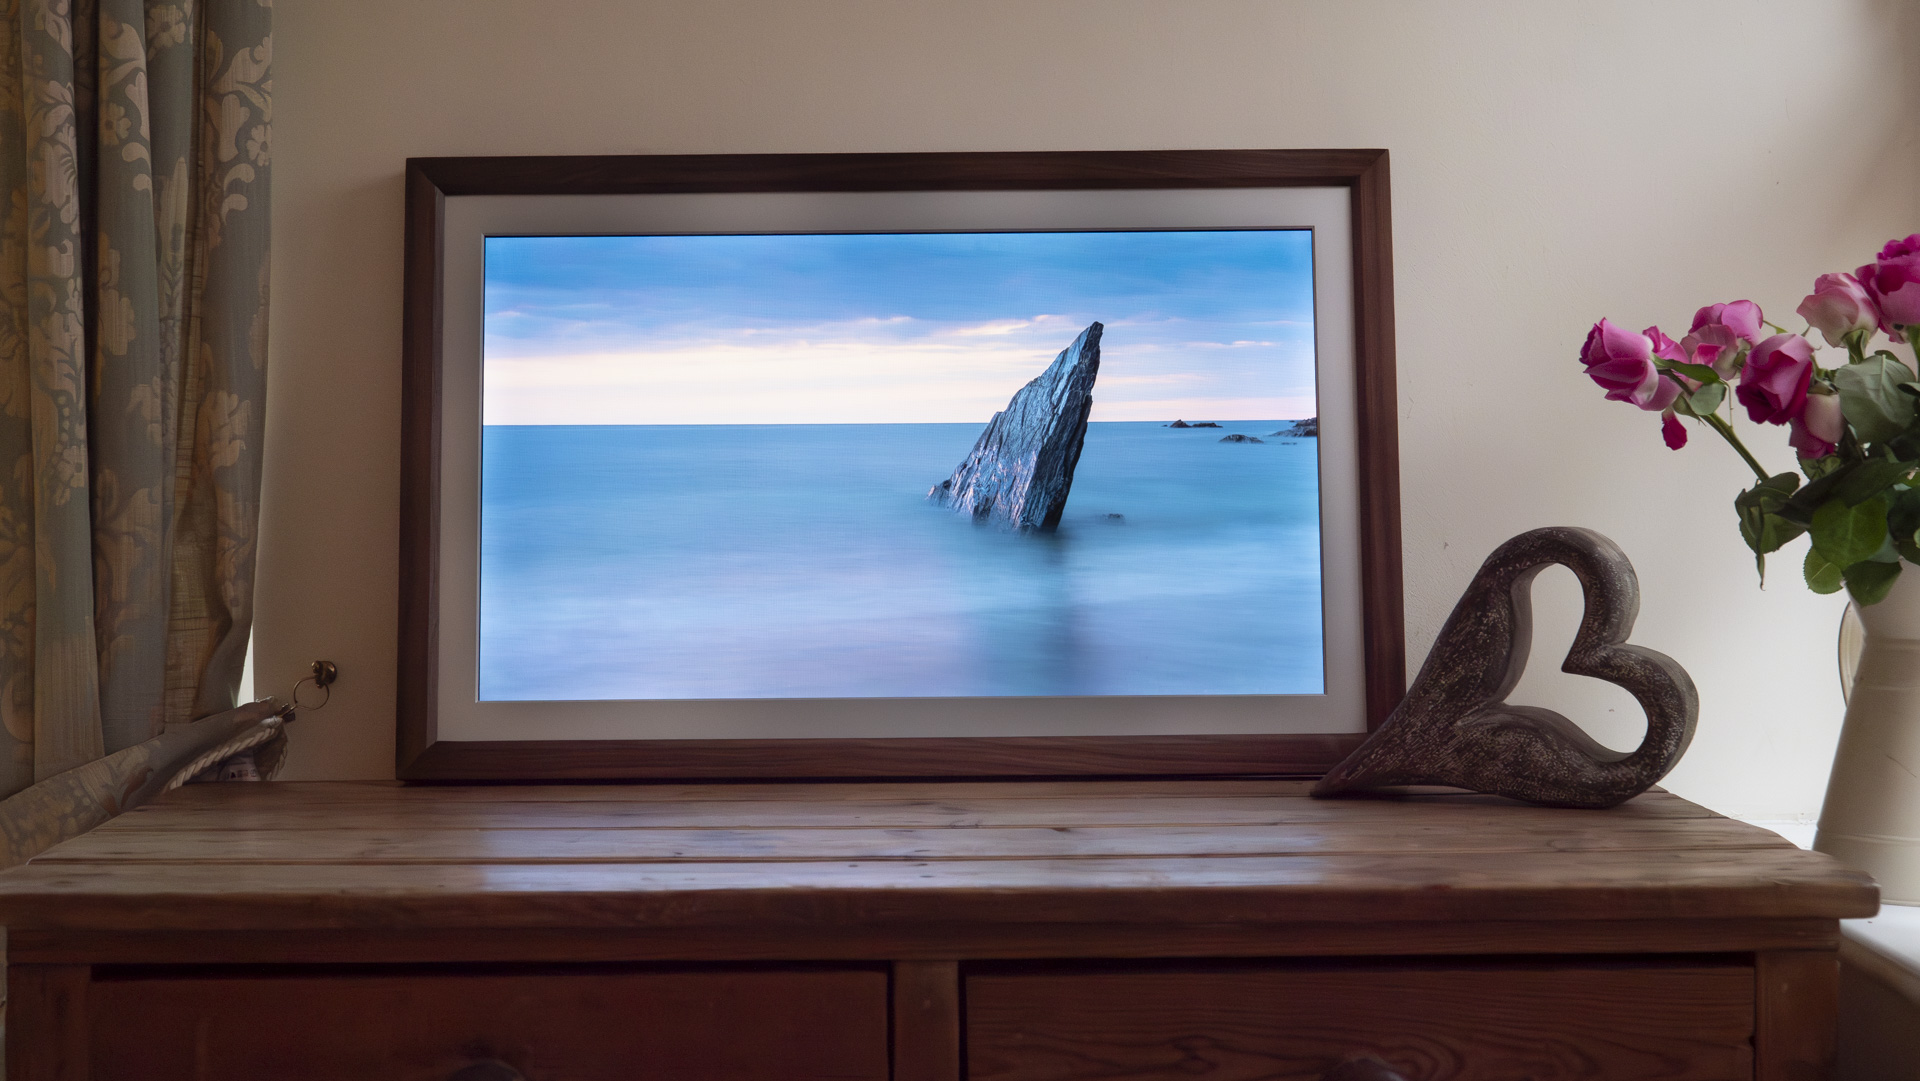 Vieunite Textura digital canvas on a wooden table with seascape picture